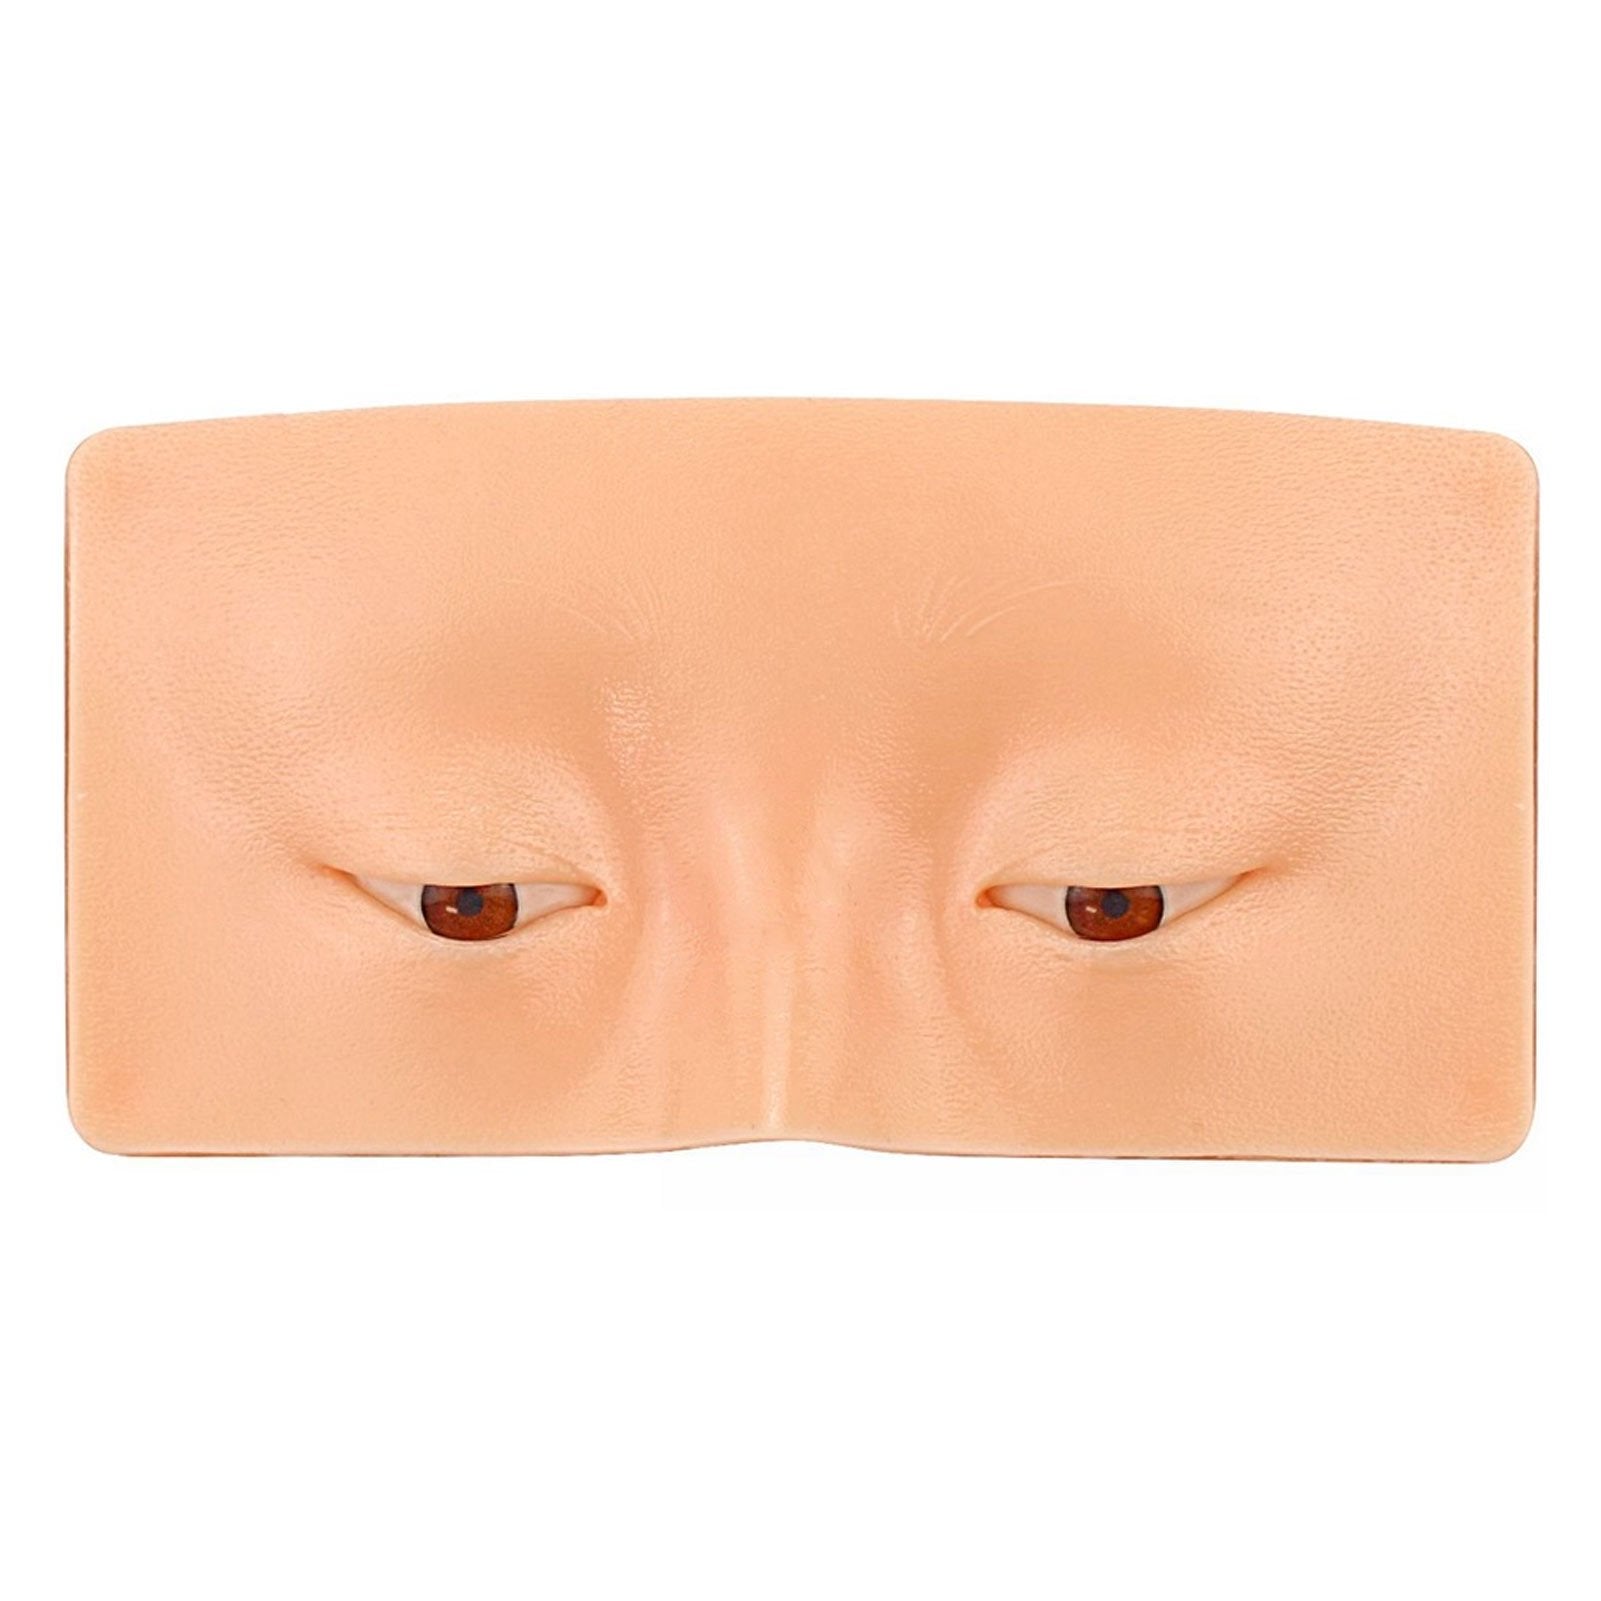 Mannequin - Eye Makeup Practice Board Soft Silicone Aid Student Tool